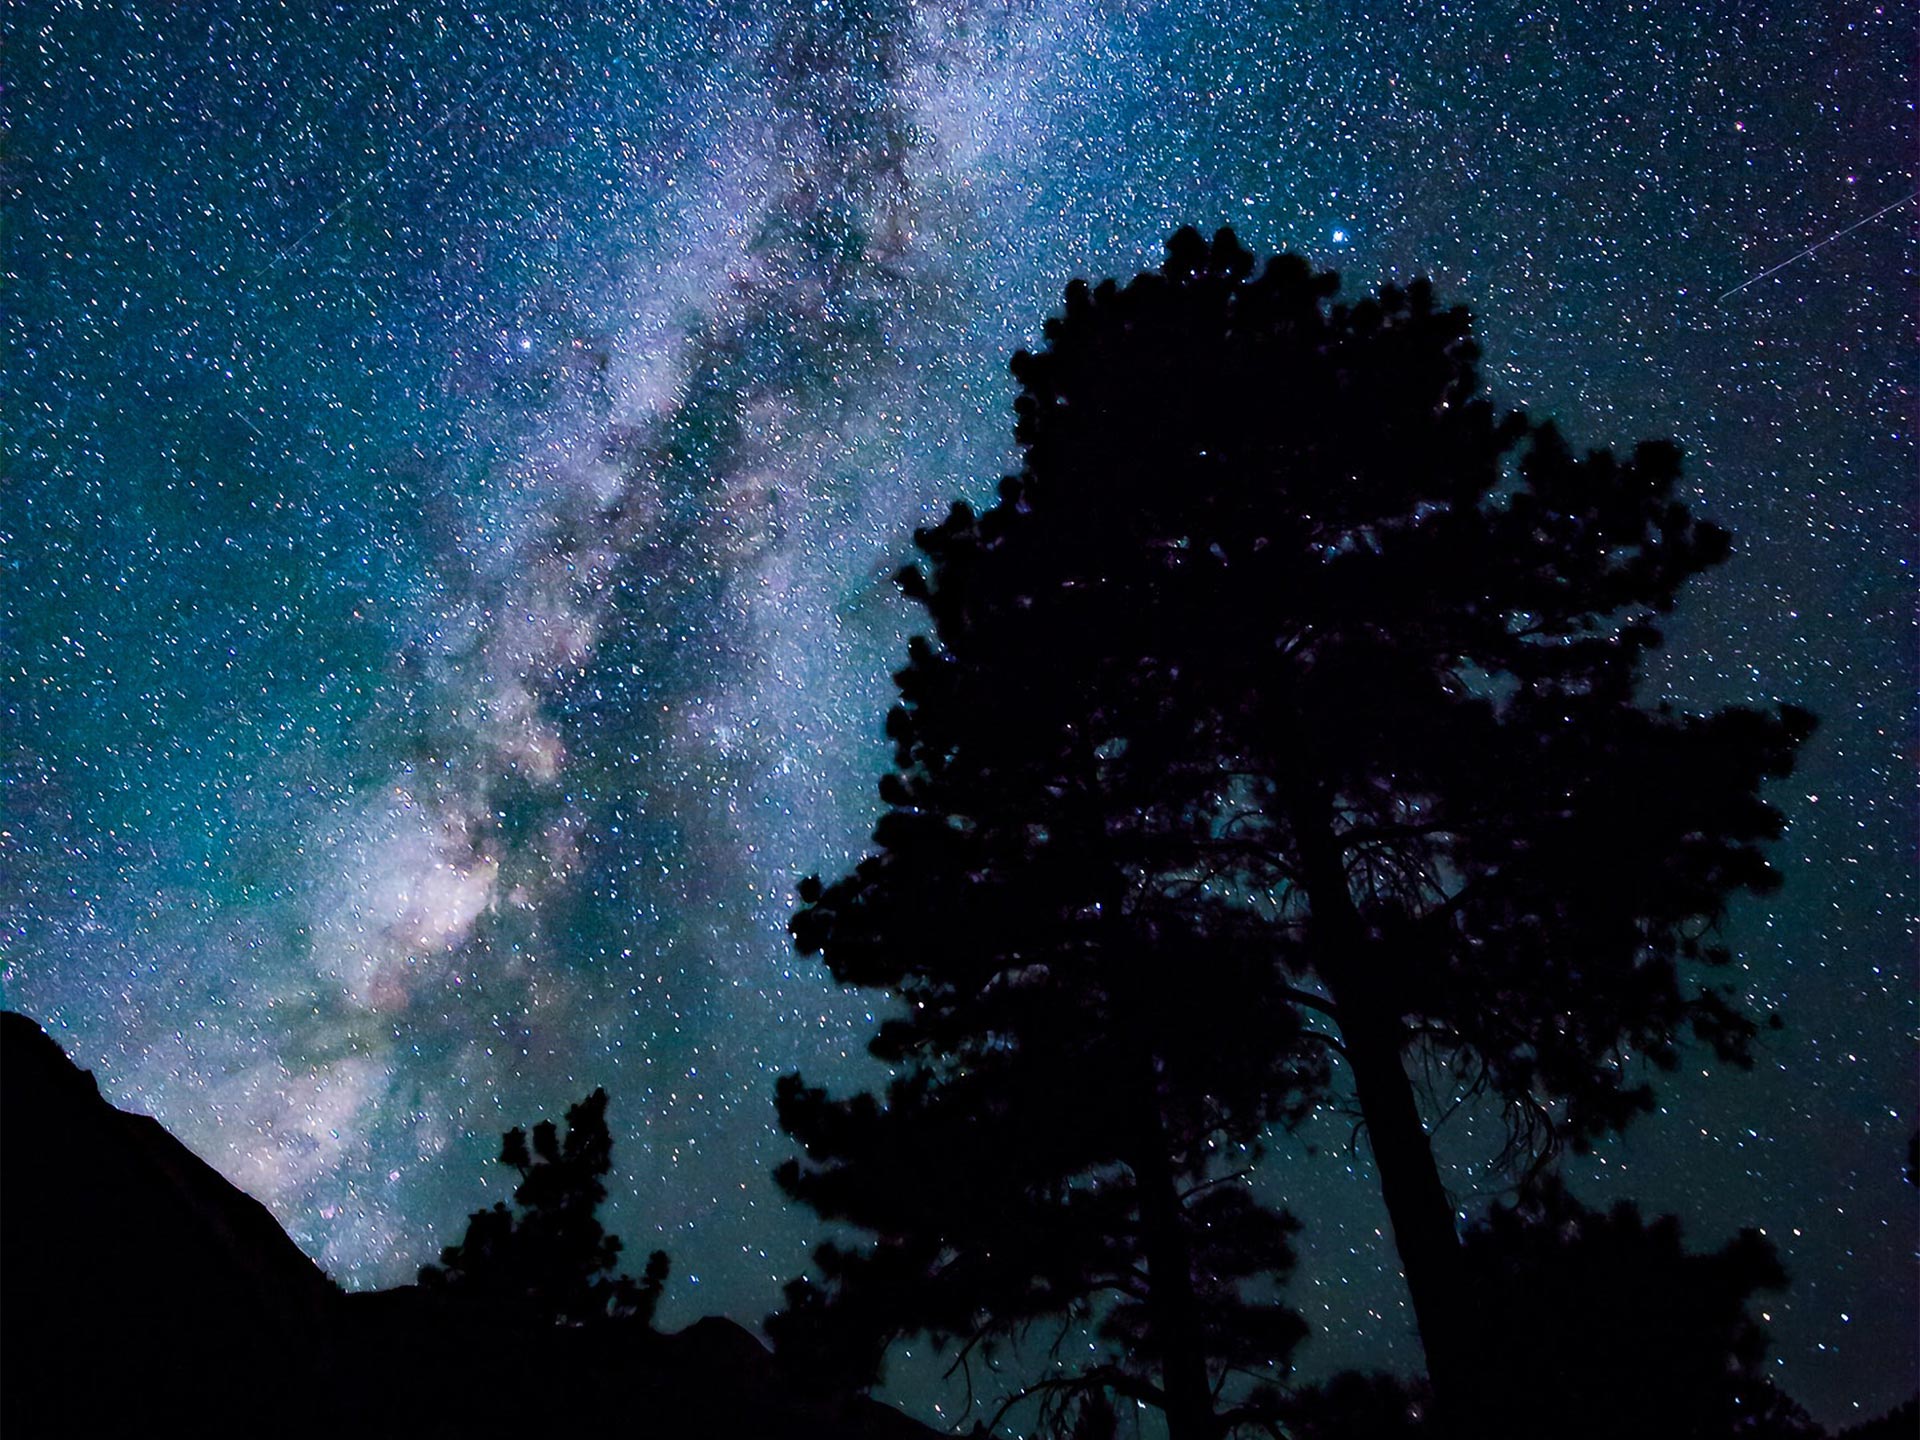 Trees and mountains silhouetted against the Milky Way